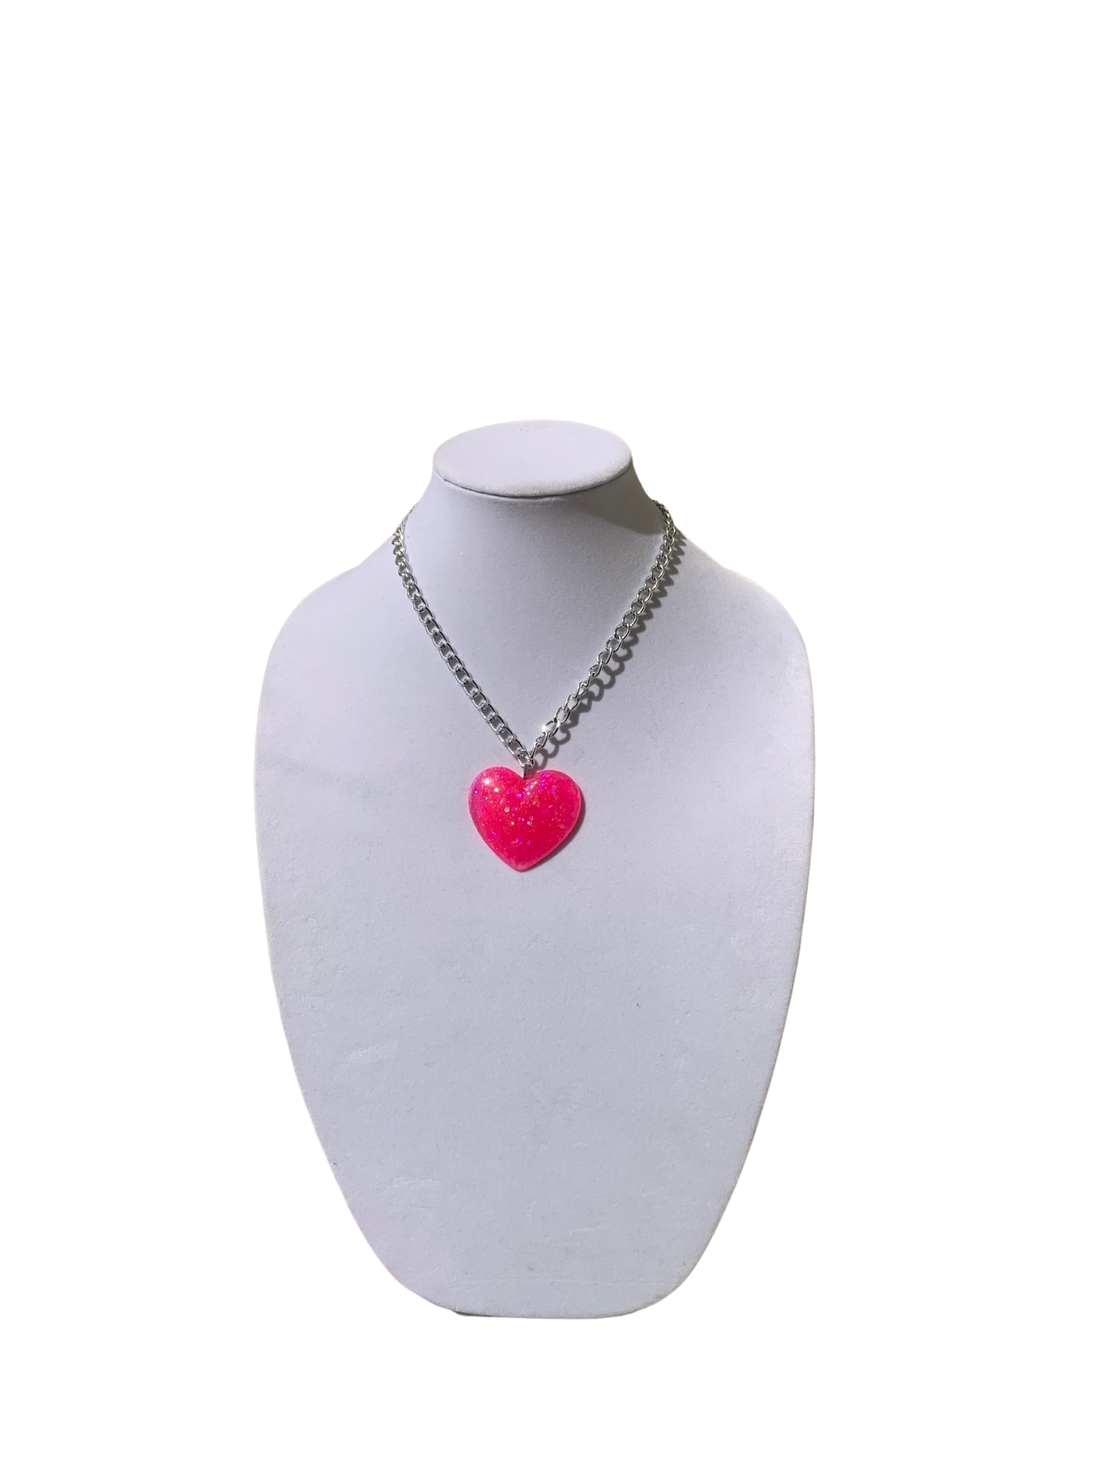 Big Pink Sparkly Heart Pendant on Lightweight Silver Aluminum Chain, 2”